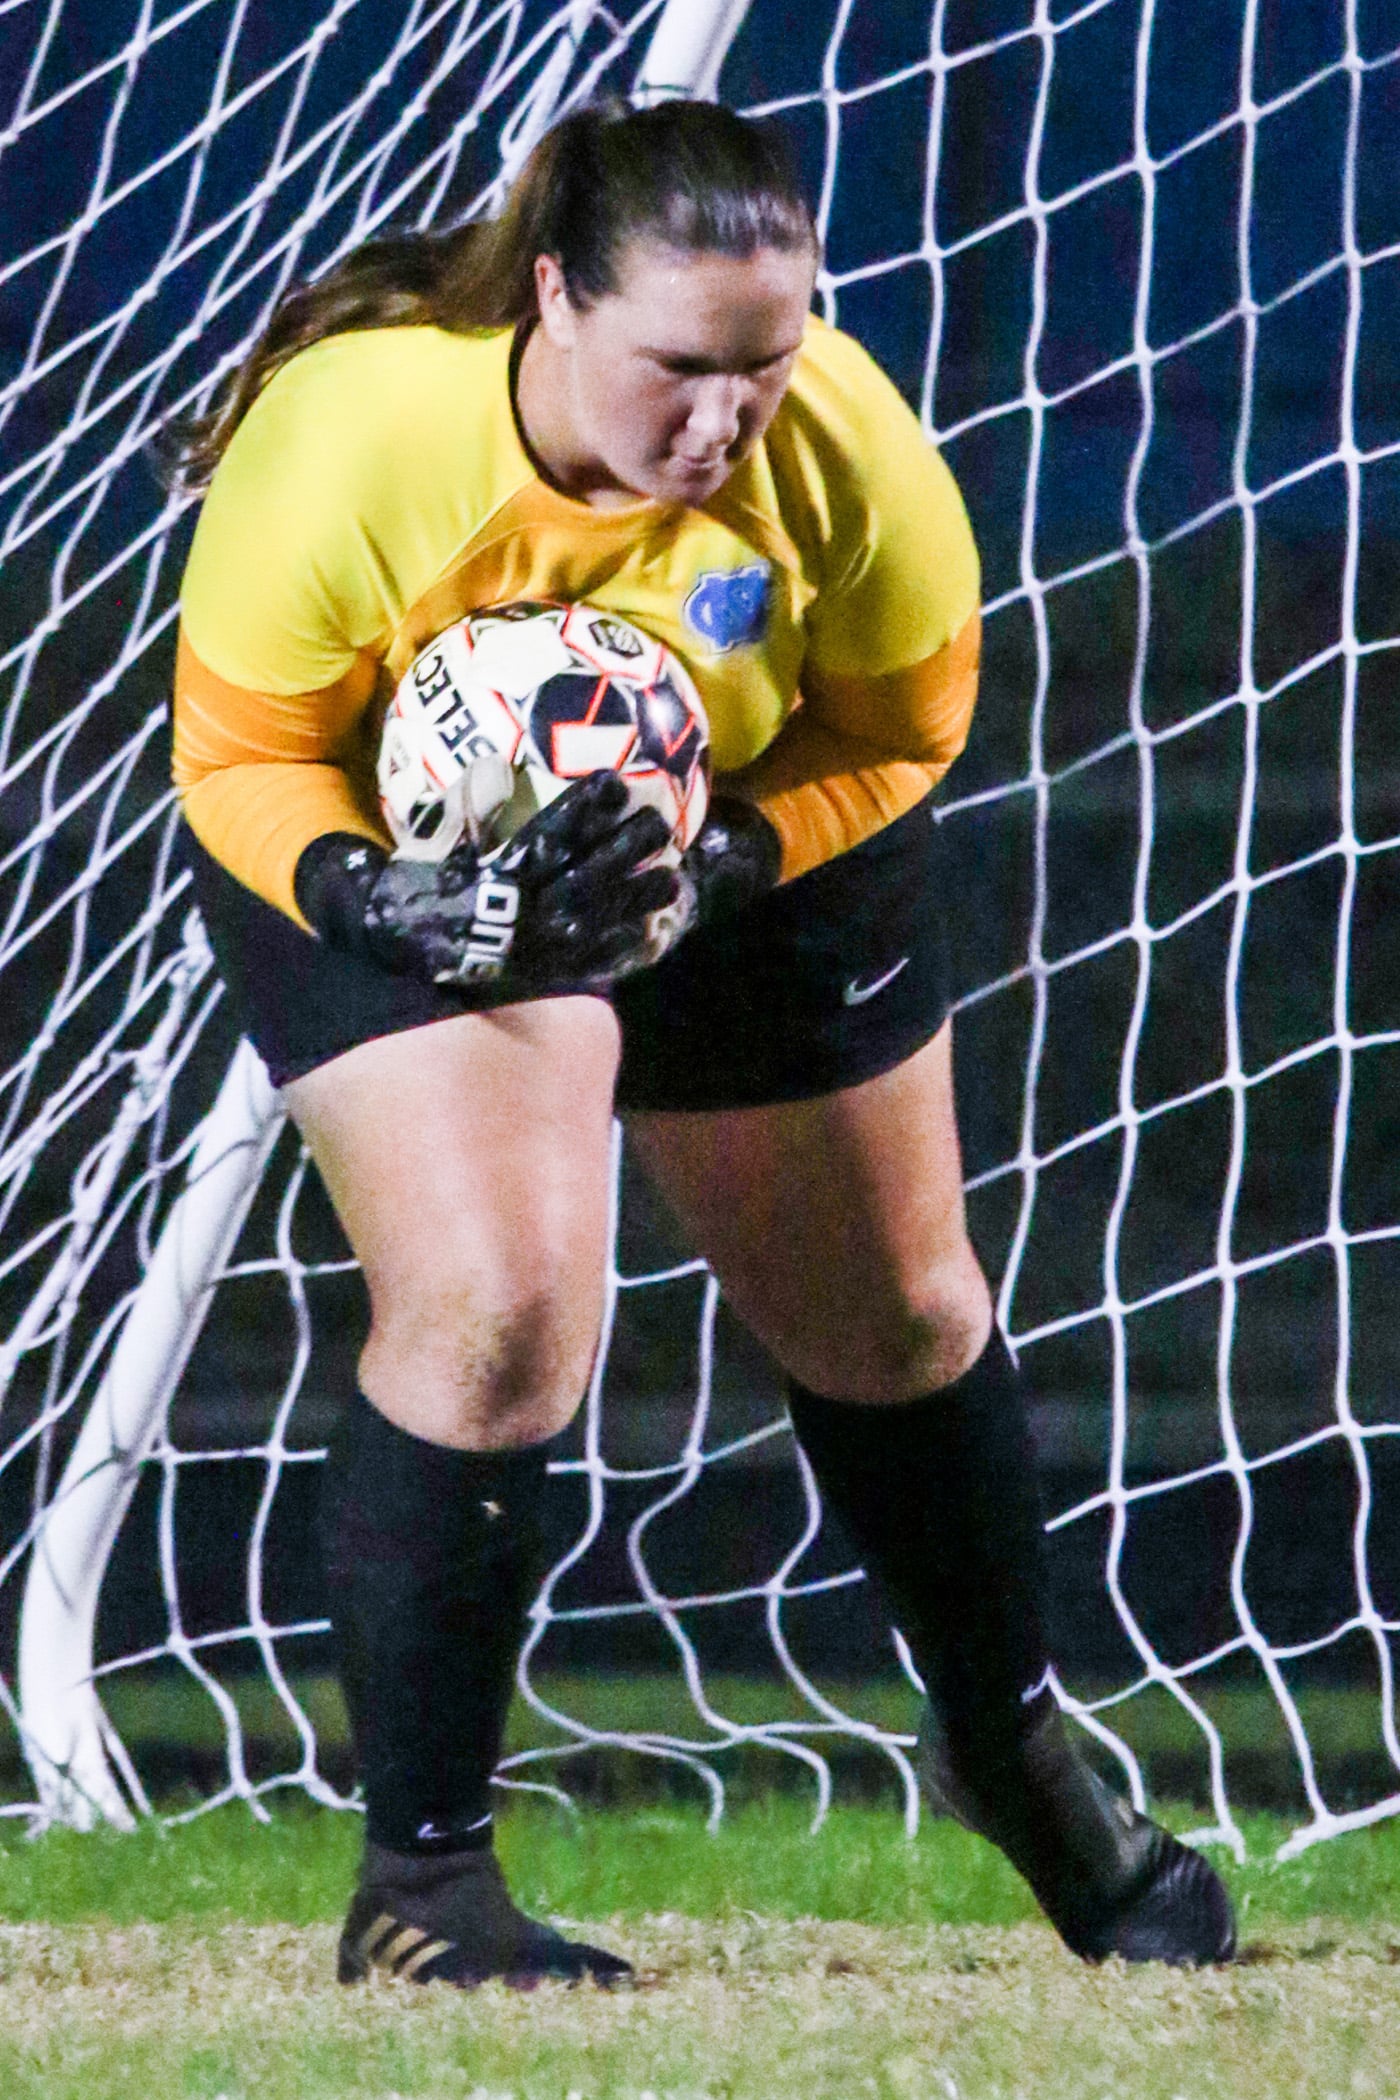 Springstead Goalie #1 name unknown protects her territory against the Sharks Wednesday night 12/14/22. Photo by Cheryl Clanton.